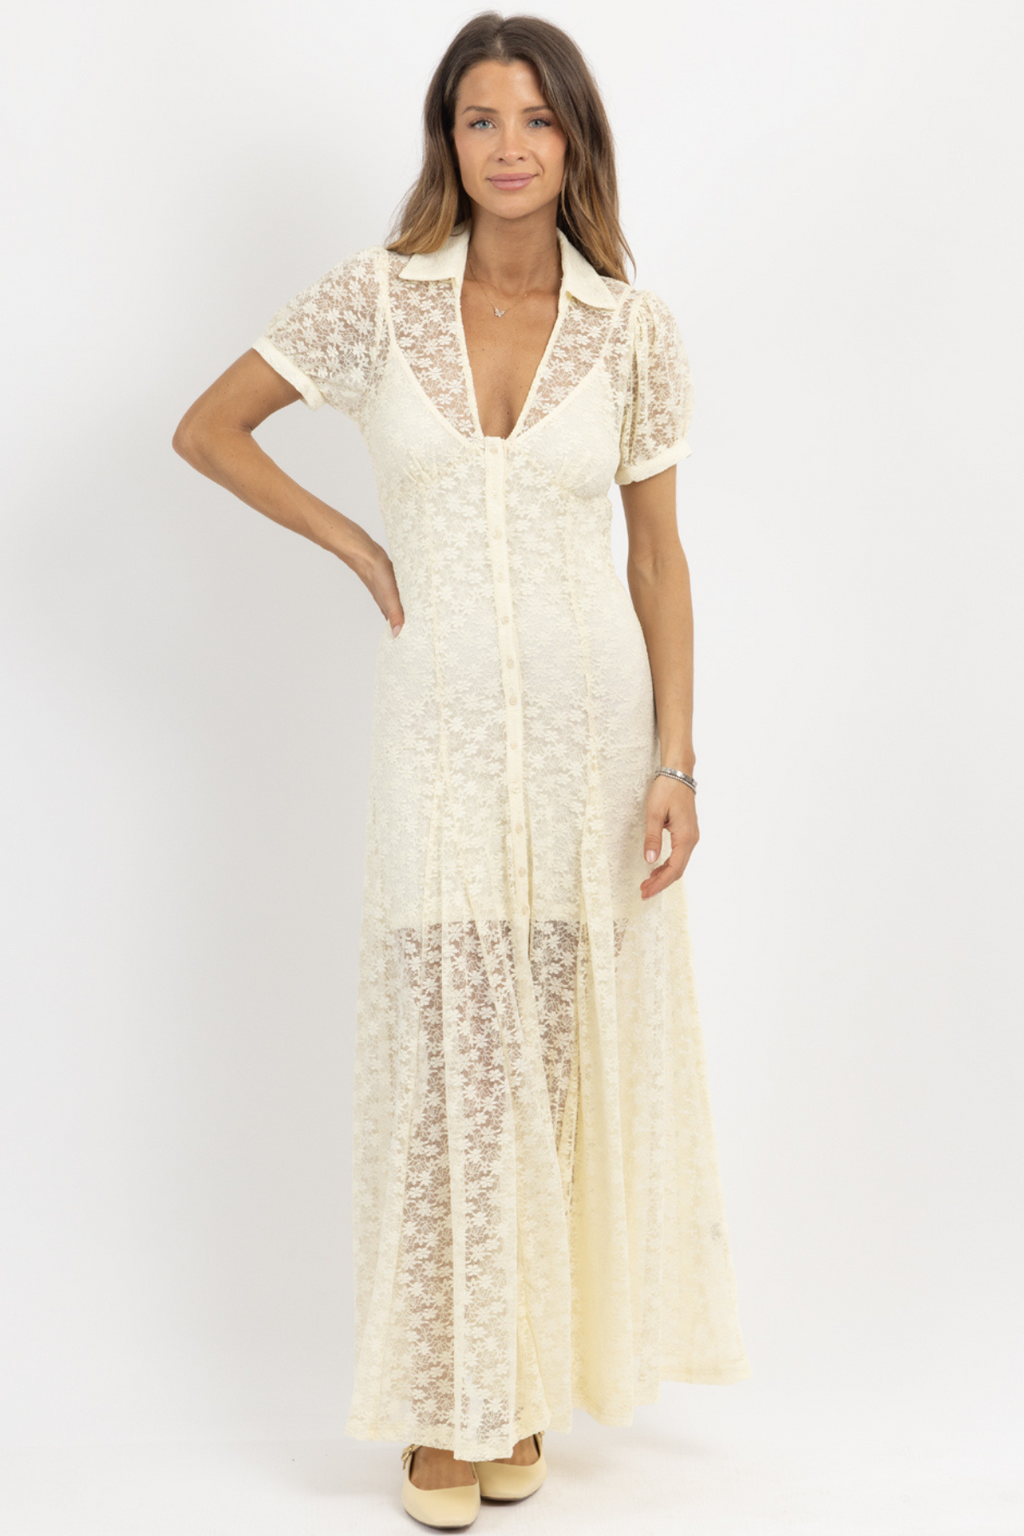 GIANNA CREAM LACE MAXI DRESS *BACK IN STOCK*